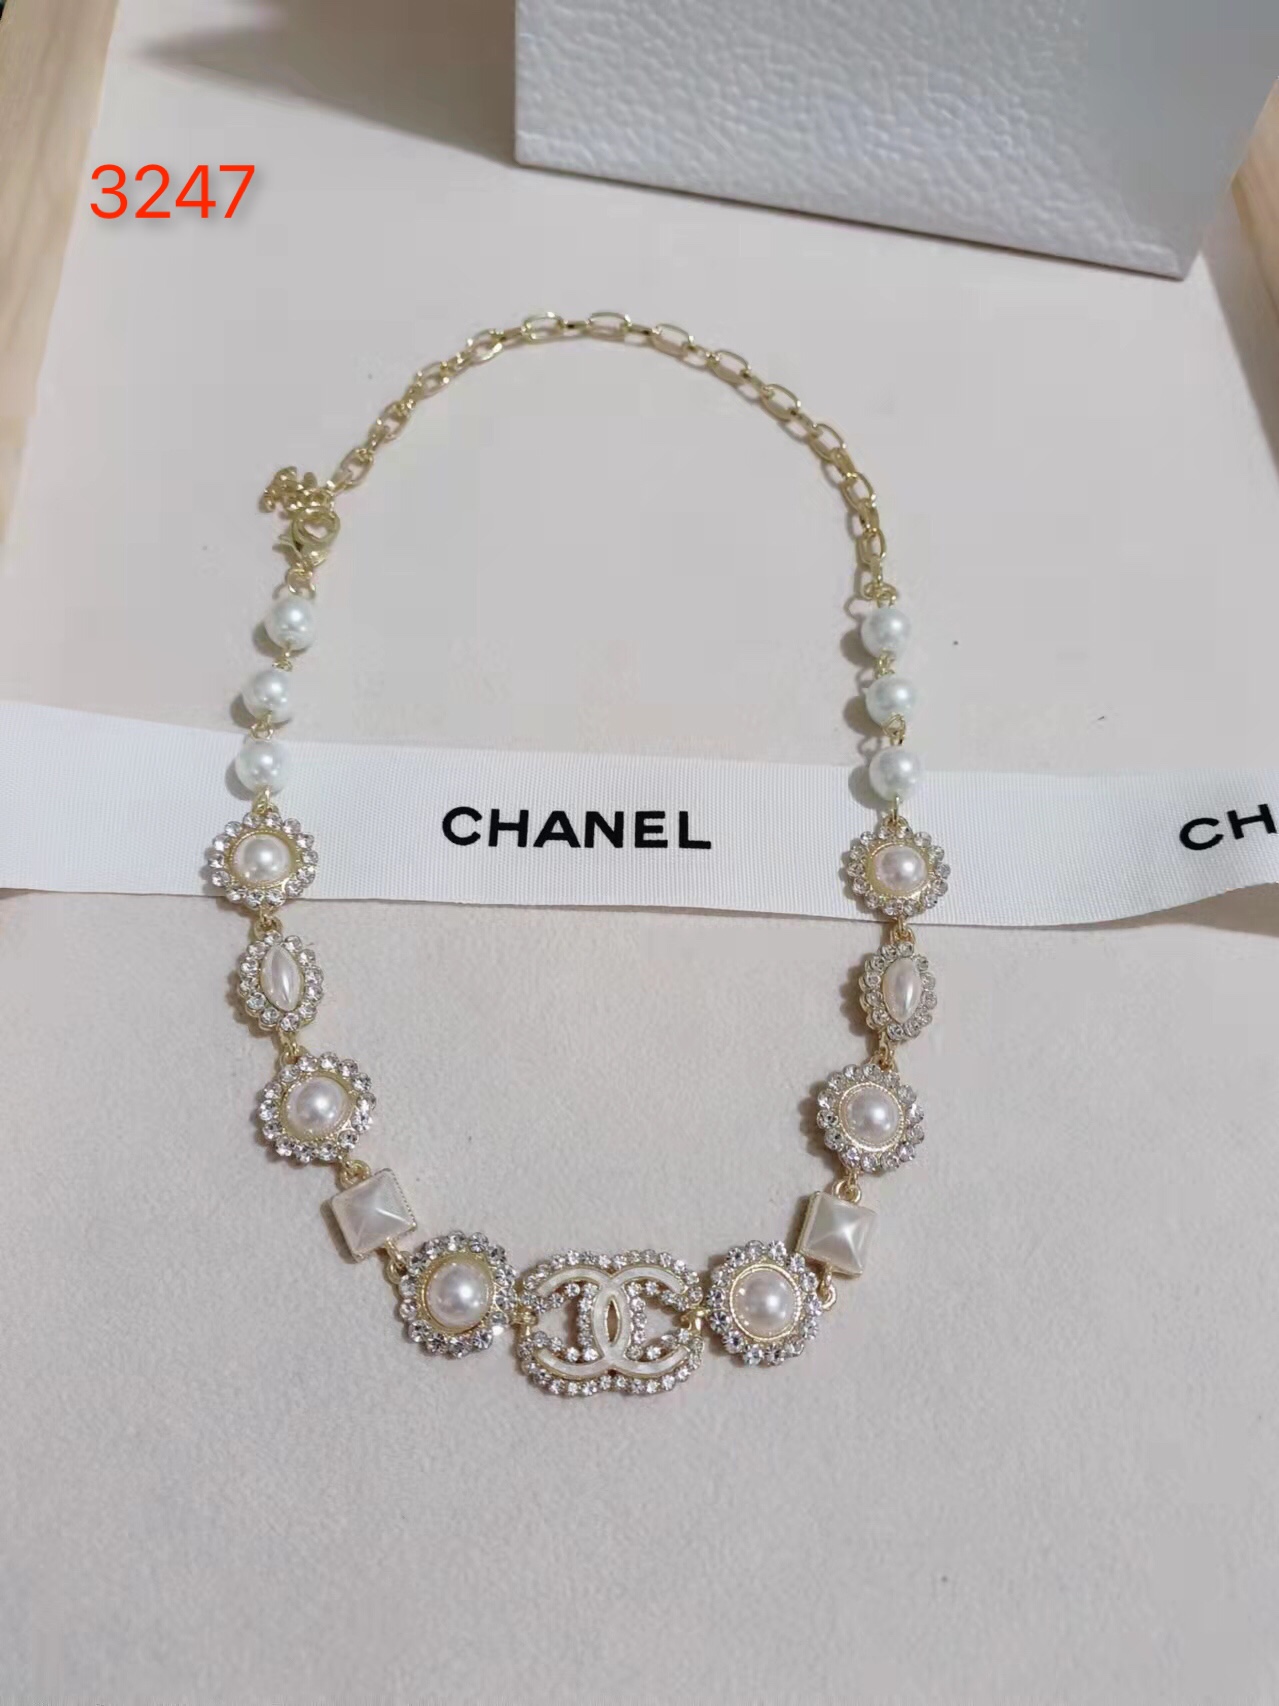 Chanel necklace 109160